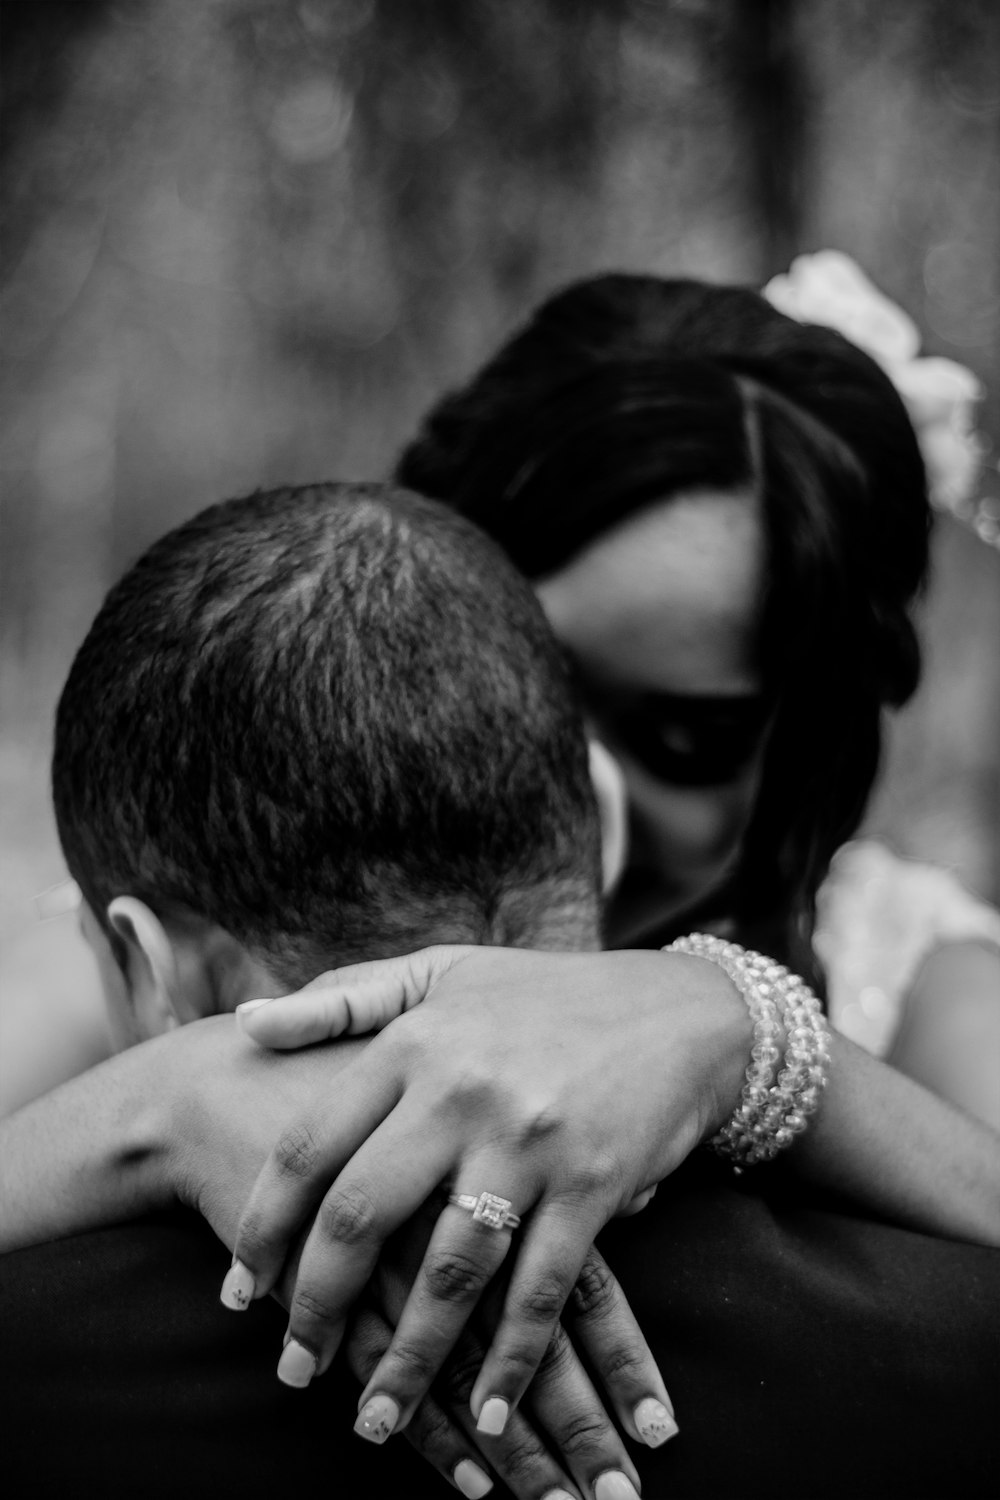 man and woman kissing grayscale photo